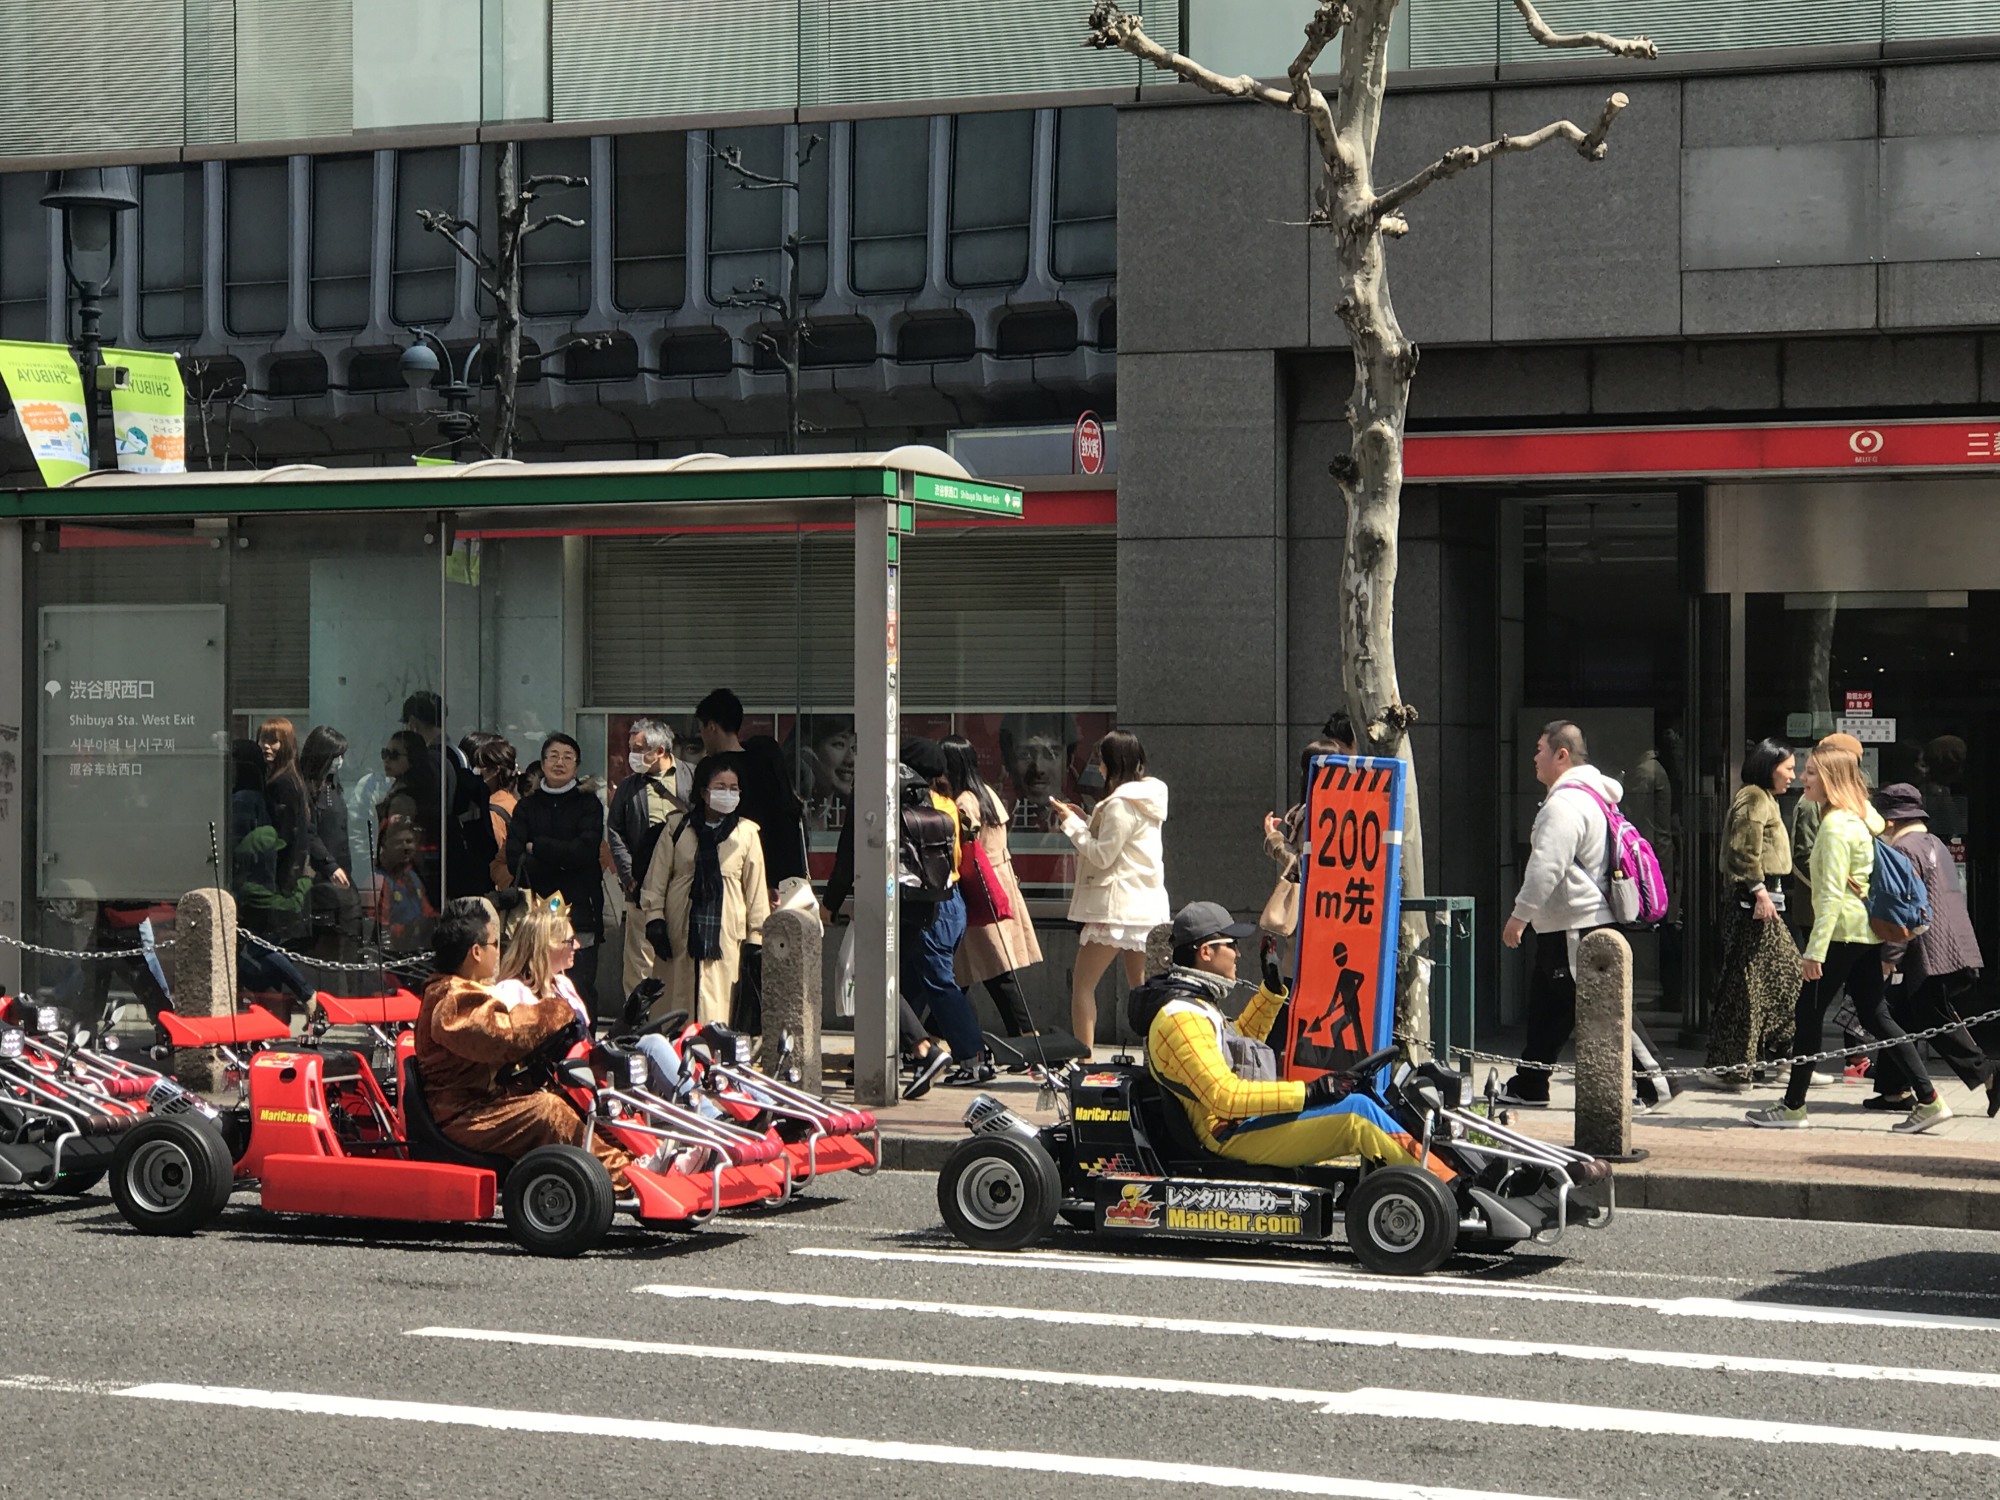 People dressed in Nintendo video game characters drive go-karts in Tokyo on April 2. | MAGDALENA OSUMI